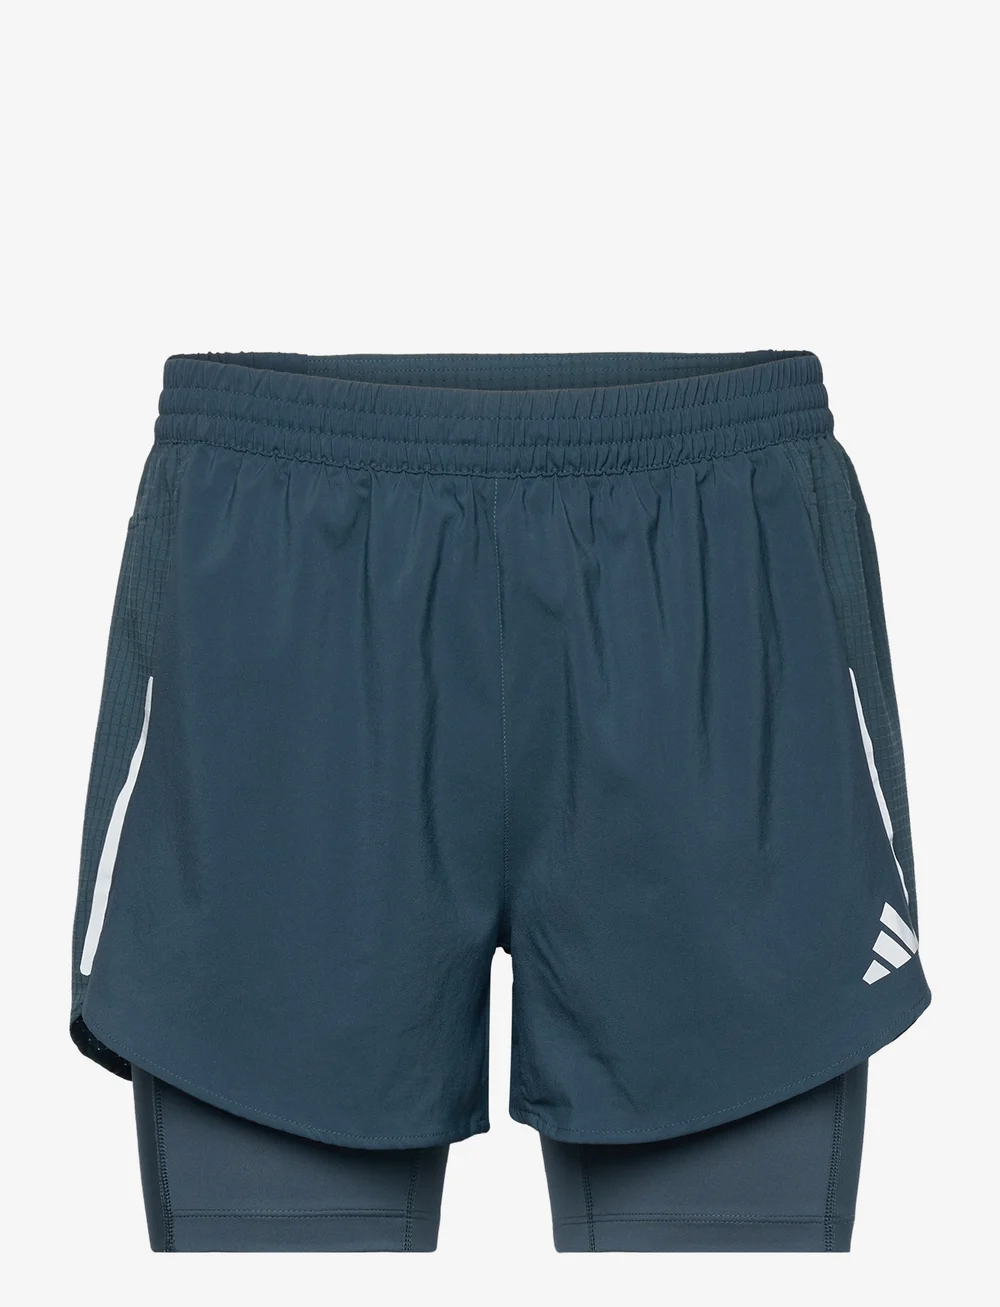 adidas Performance Designed 4 Running 2-in-1 Shorts - Sports